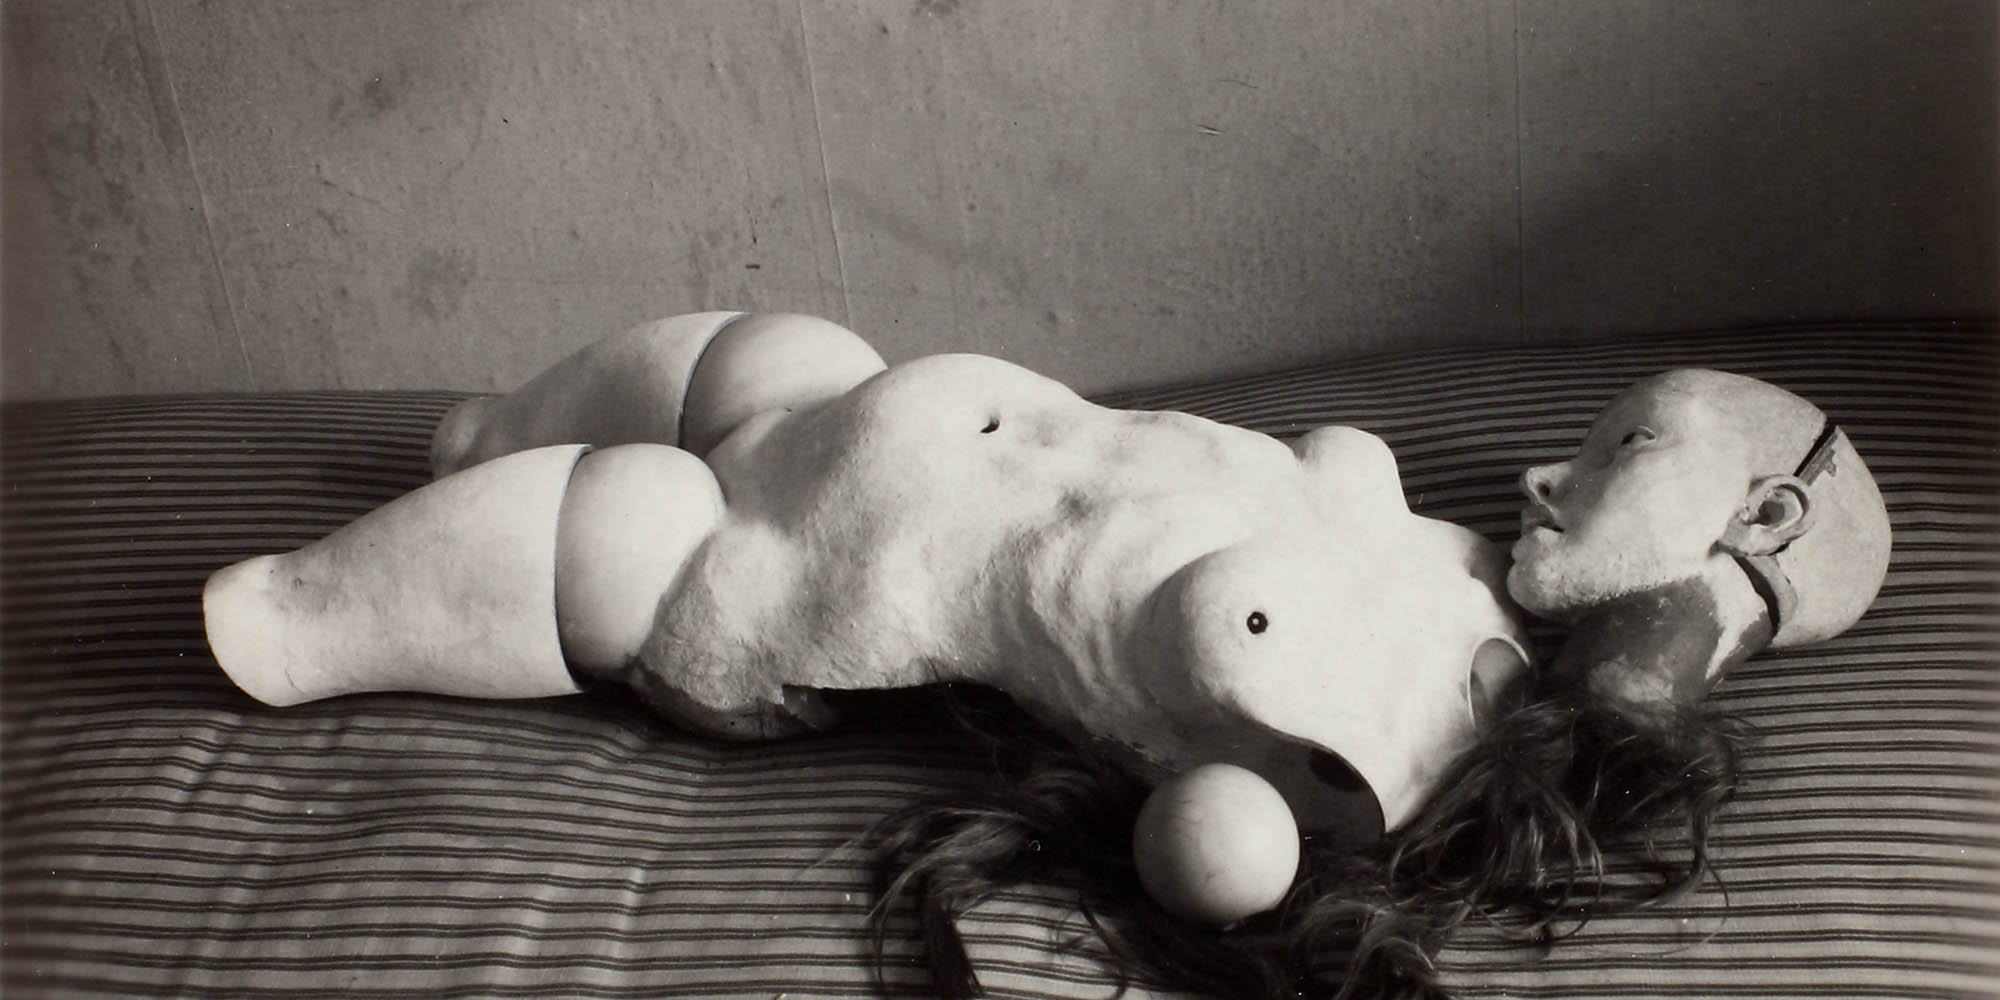 A photograph of a doll like figure laying on a striped surface, perhaps a bed. The digure has dark hair, and is nude with no arms of lower legs.